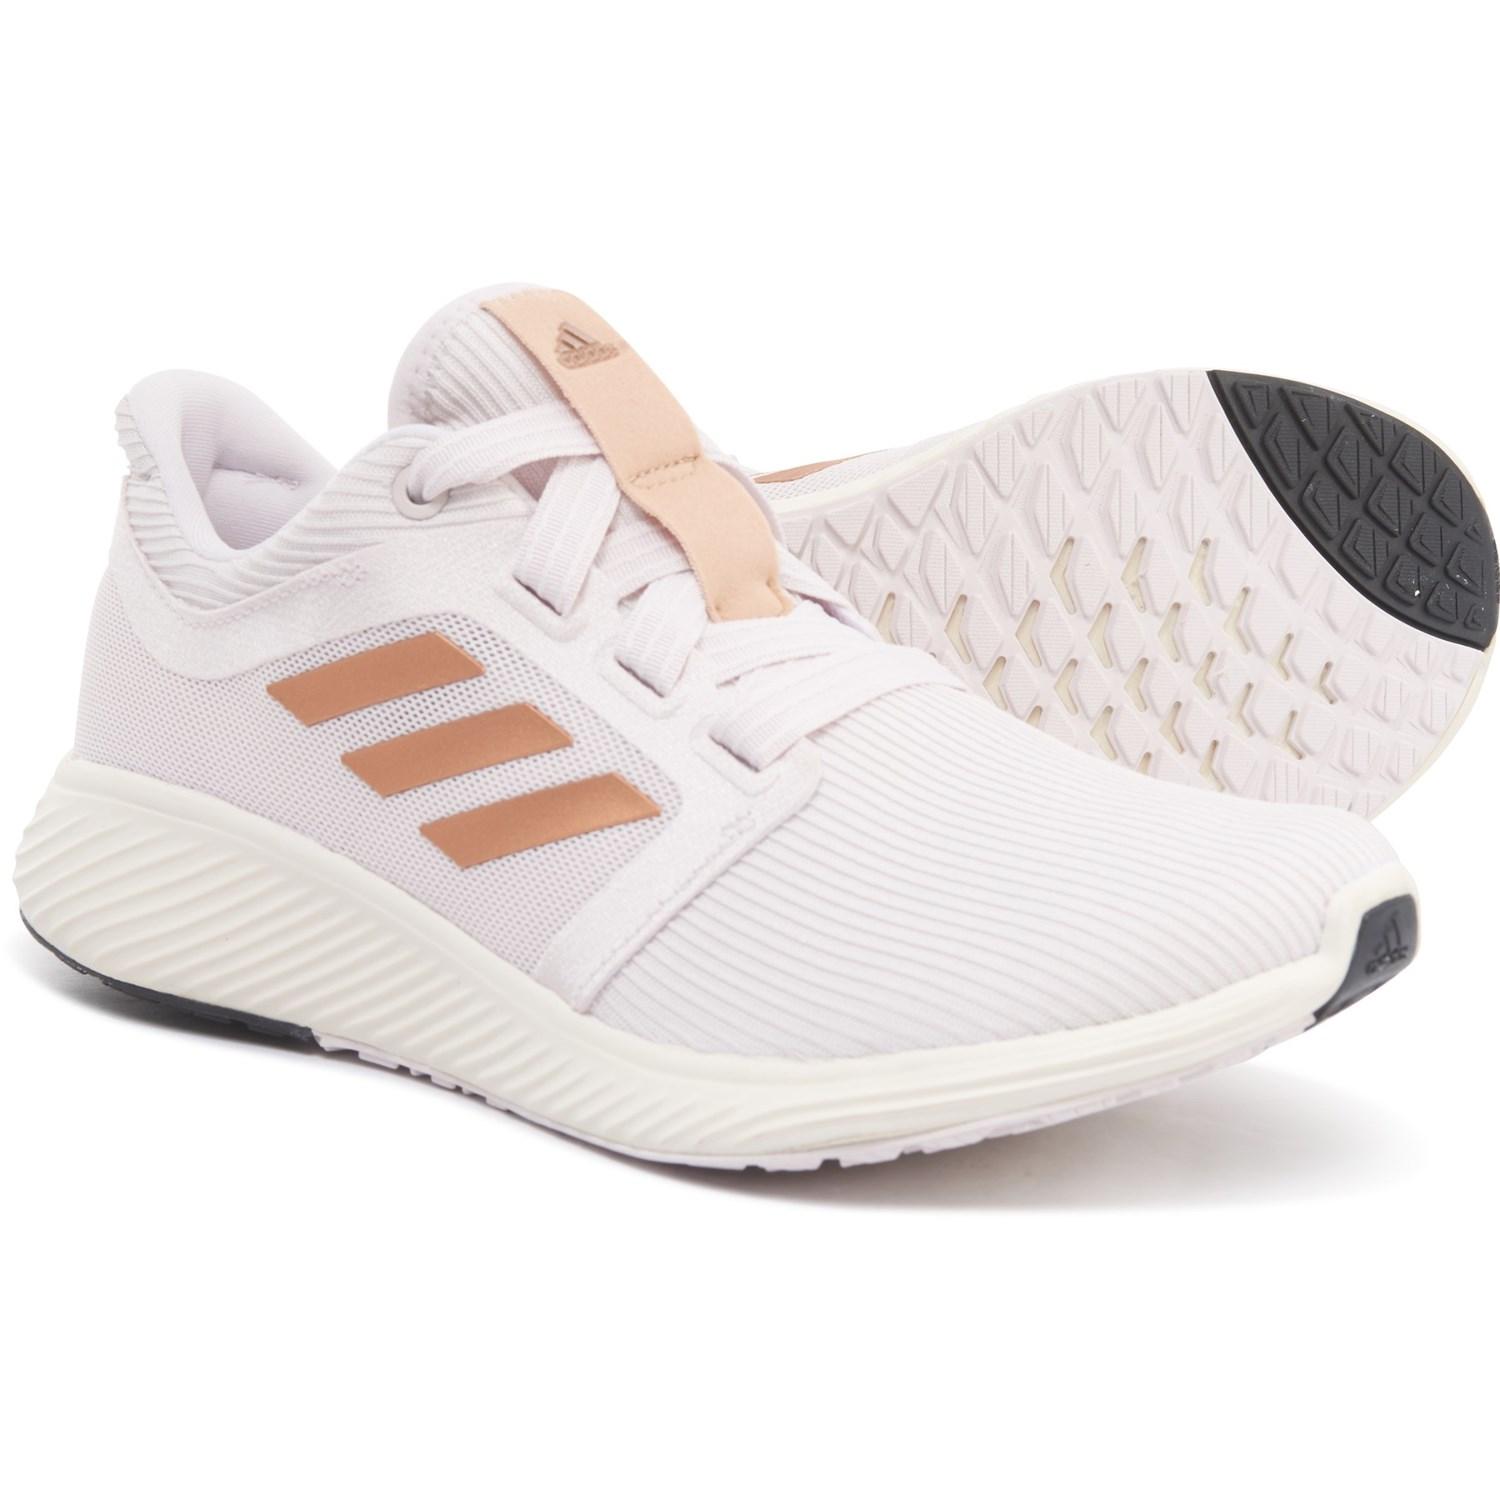 adidas Edge Lux 3 Running Shoes in White/Rose Gold (White) | Lyst